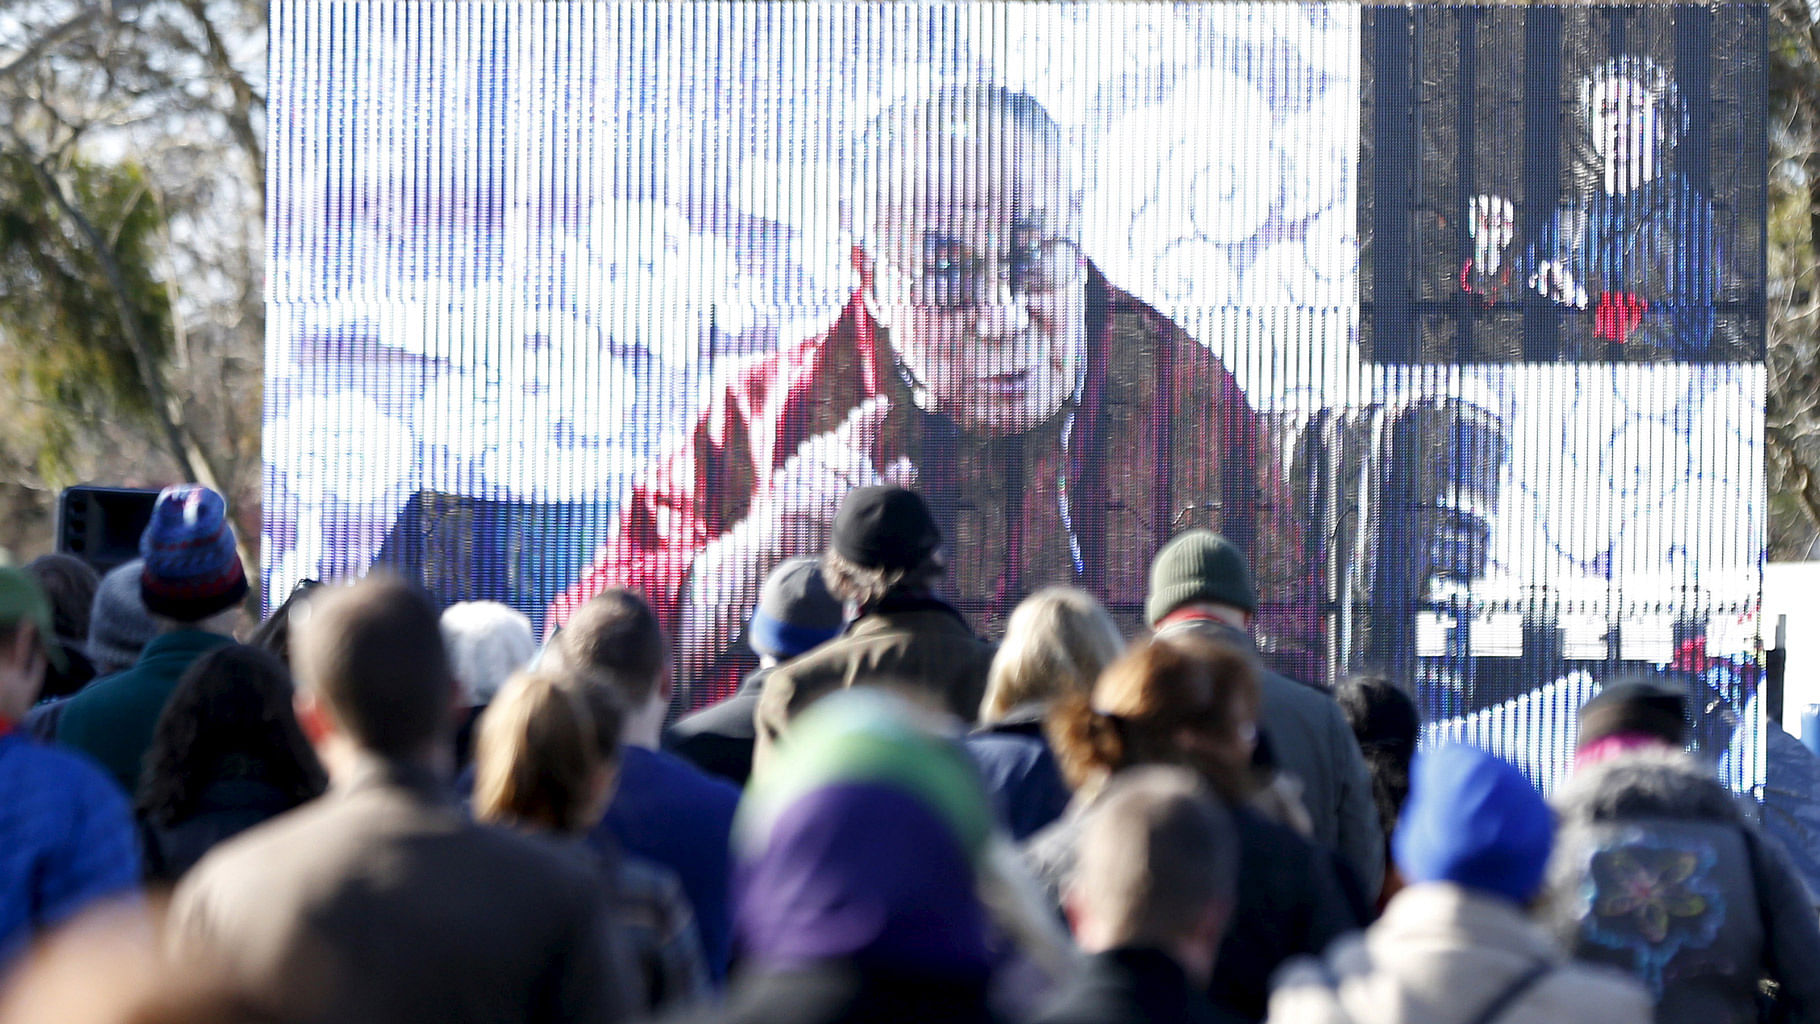 Exiled Tibetan spiritual leader the Dalai Lama is pictured live on a giant screen. (Photo: Reuters)